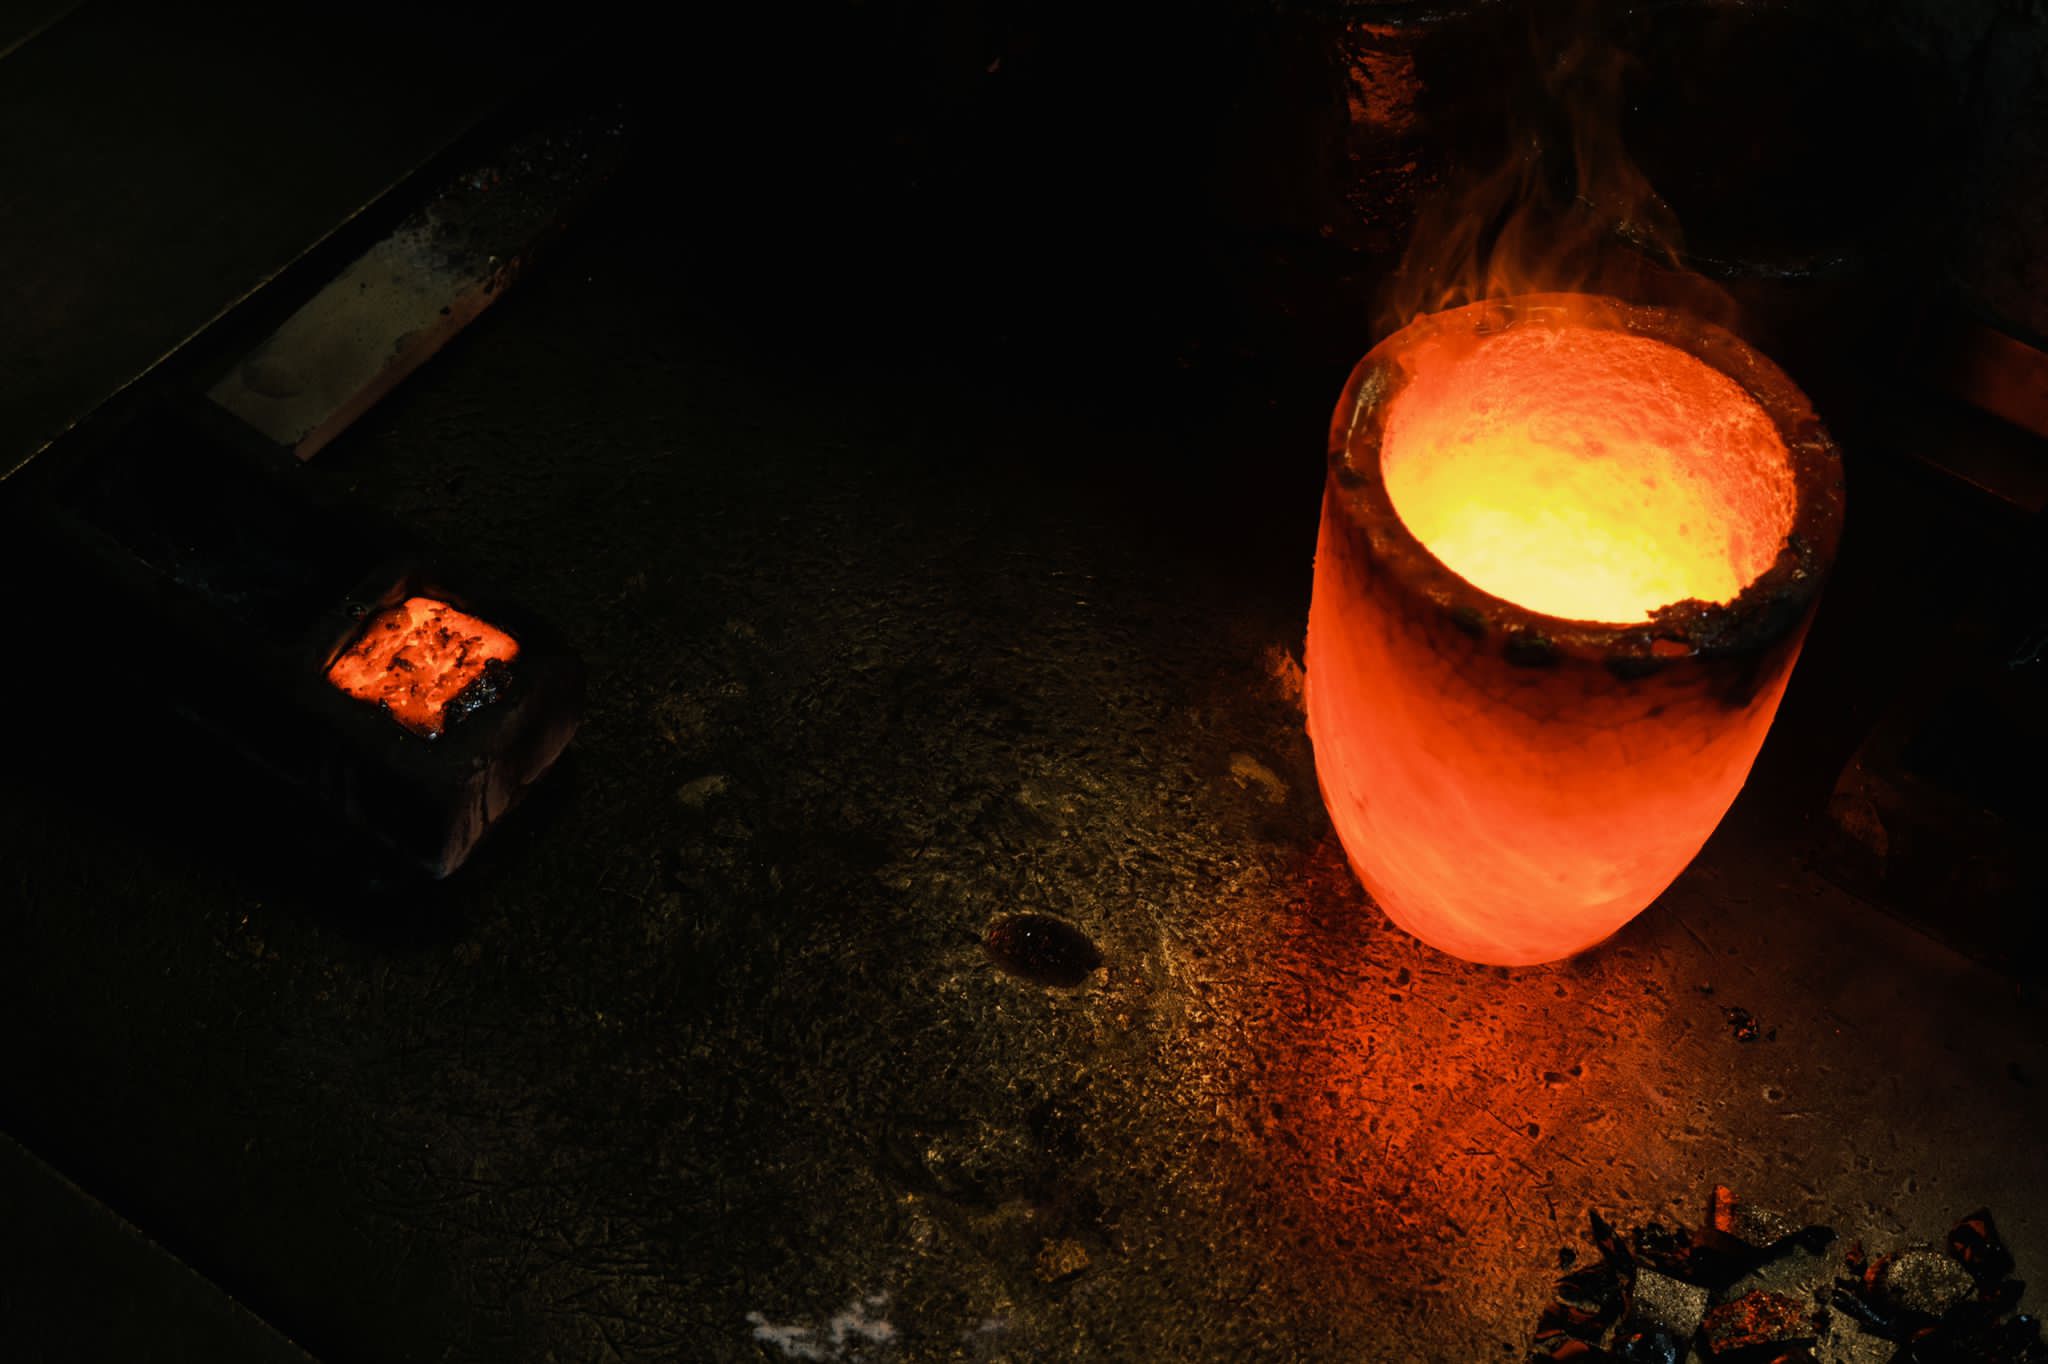 Smelting gold for jewellery reclamation